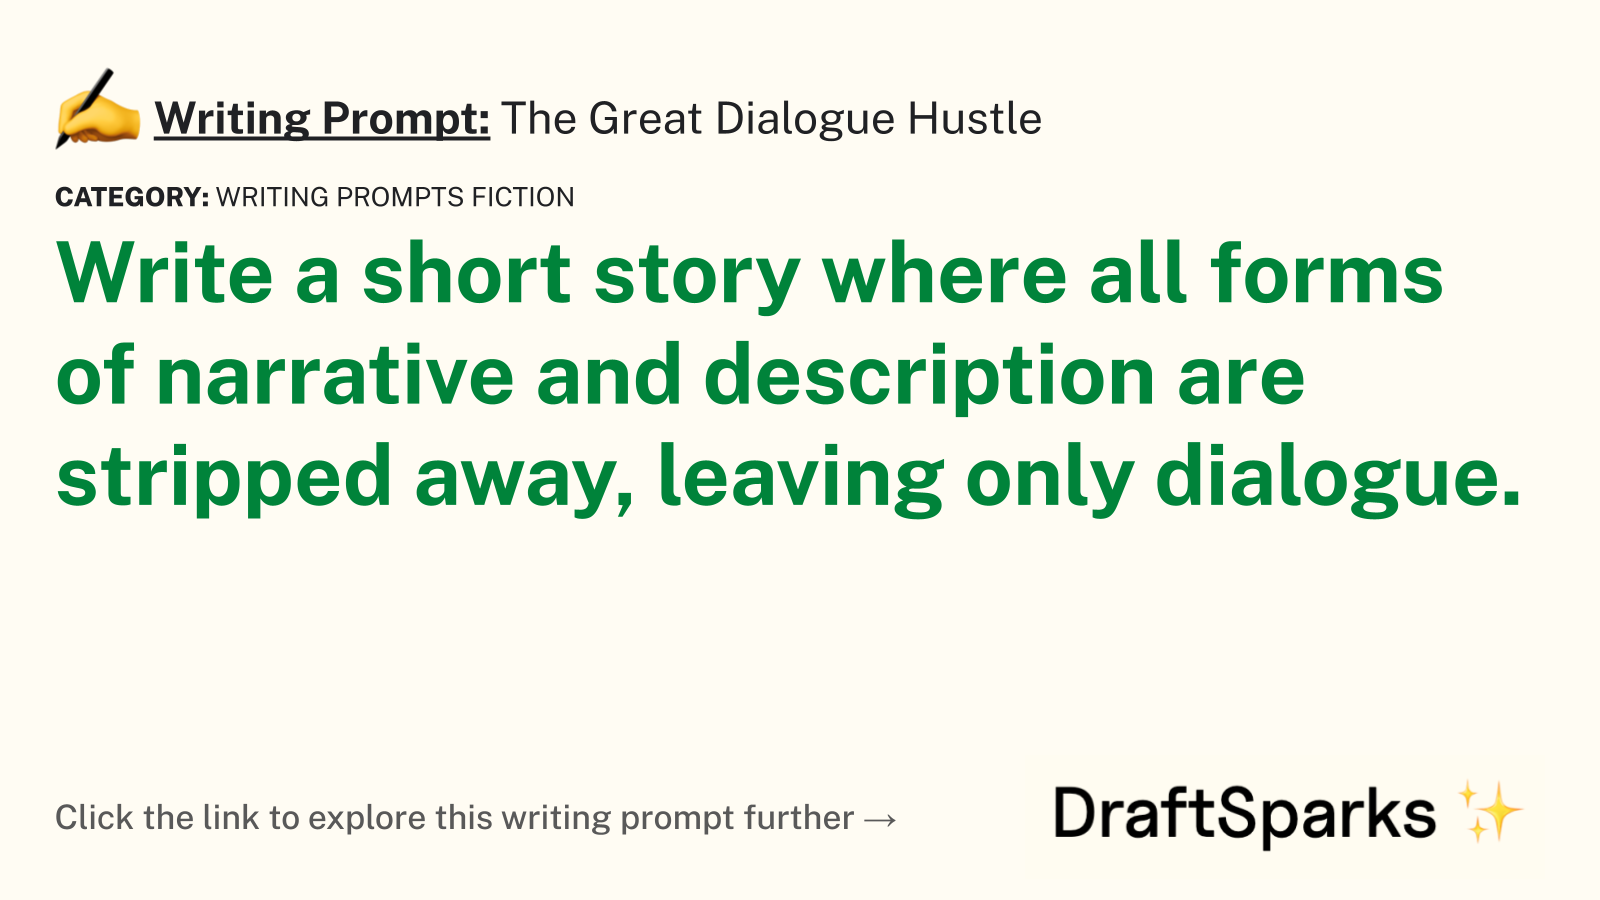 The Great Dialogue Hustle